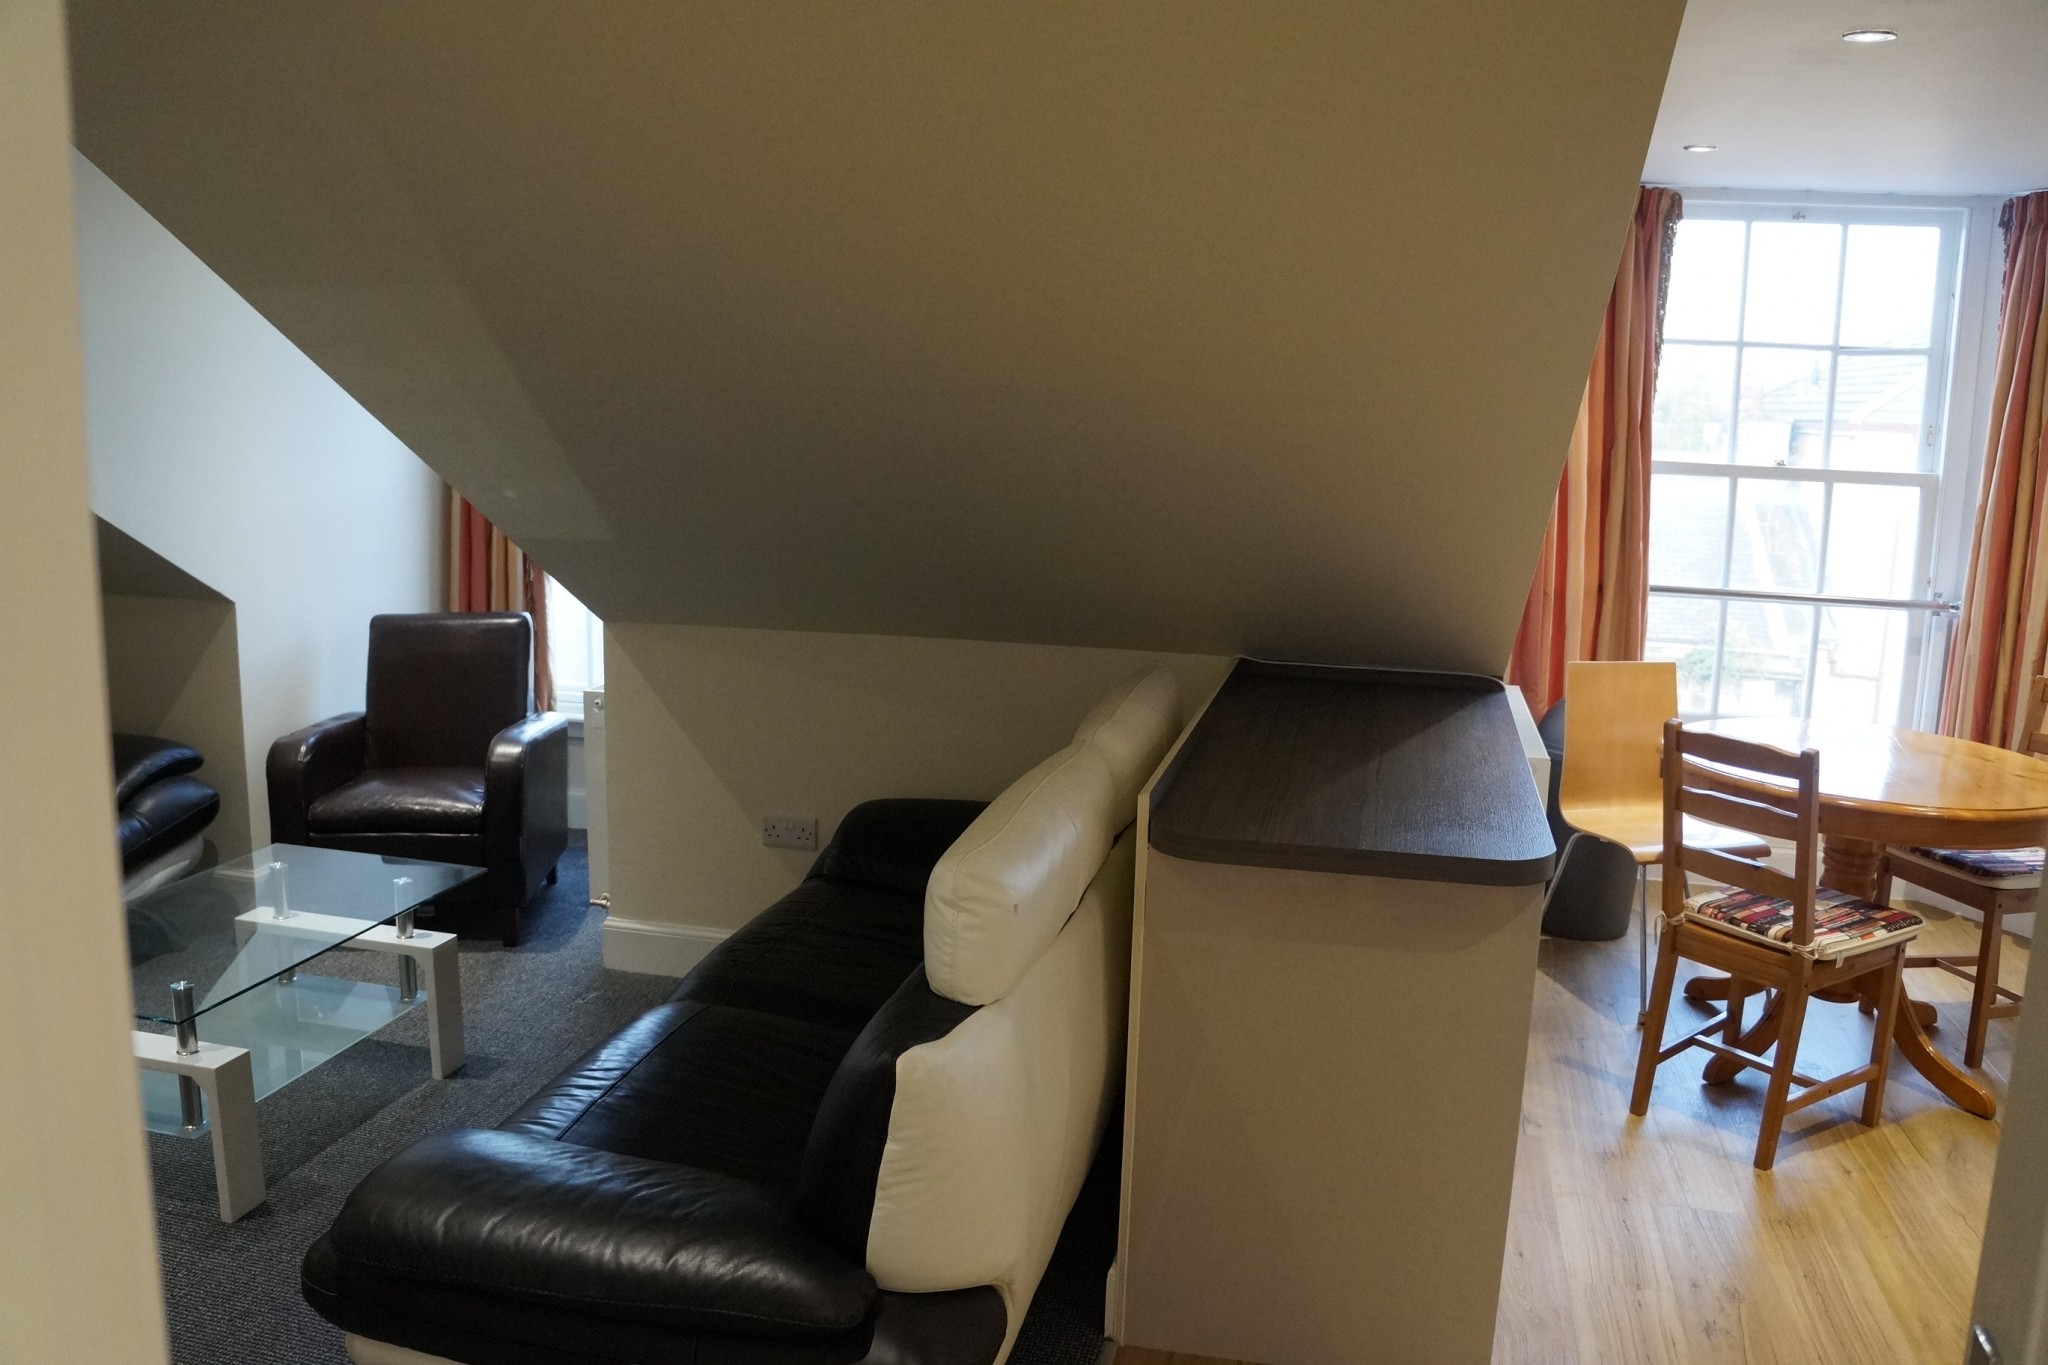 1 bedroom flat to let